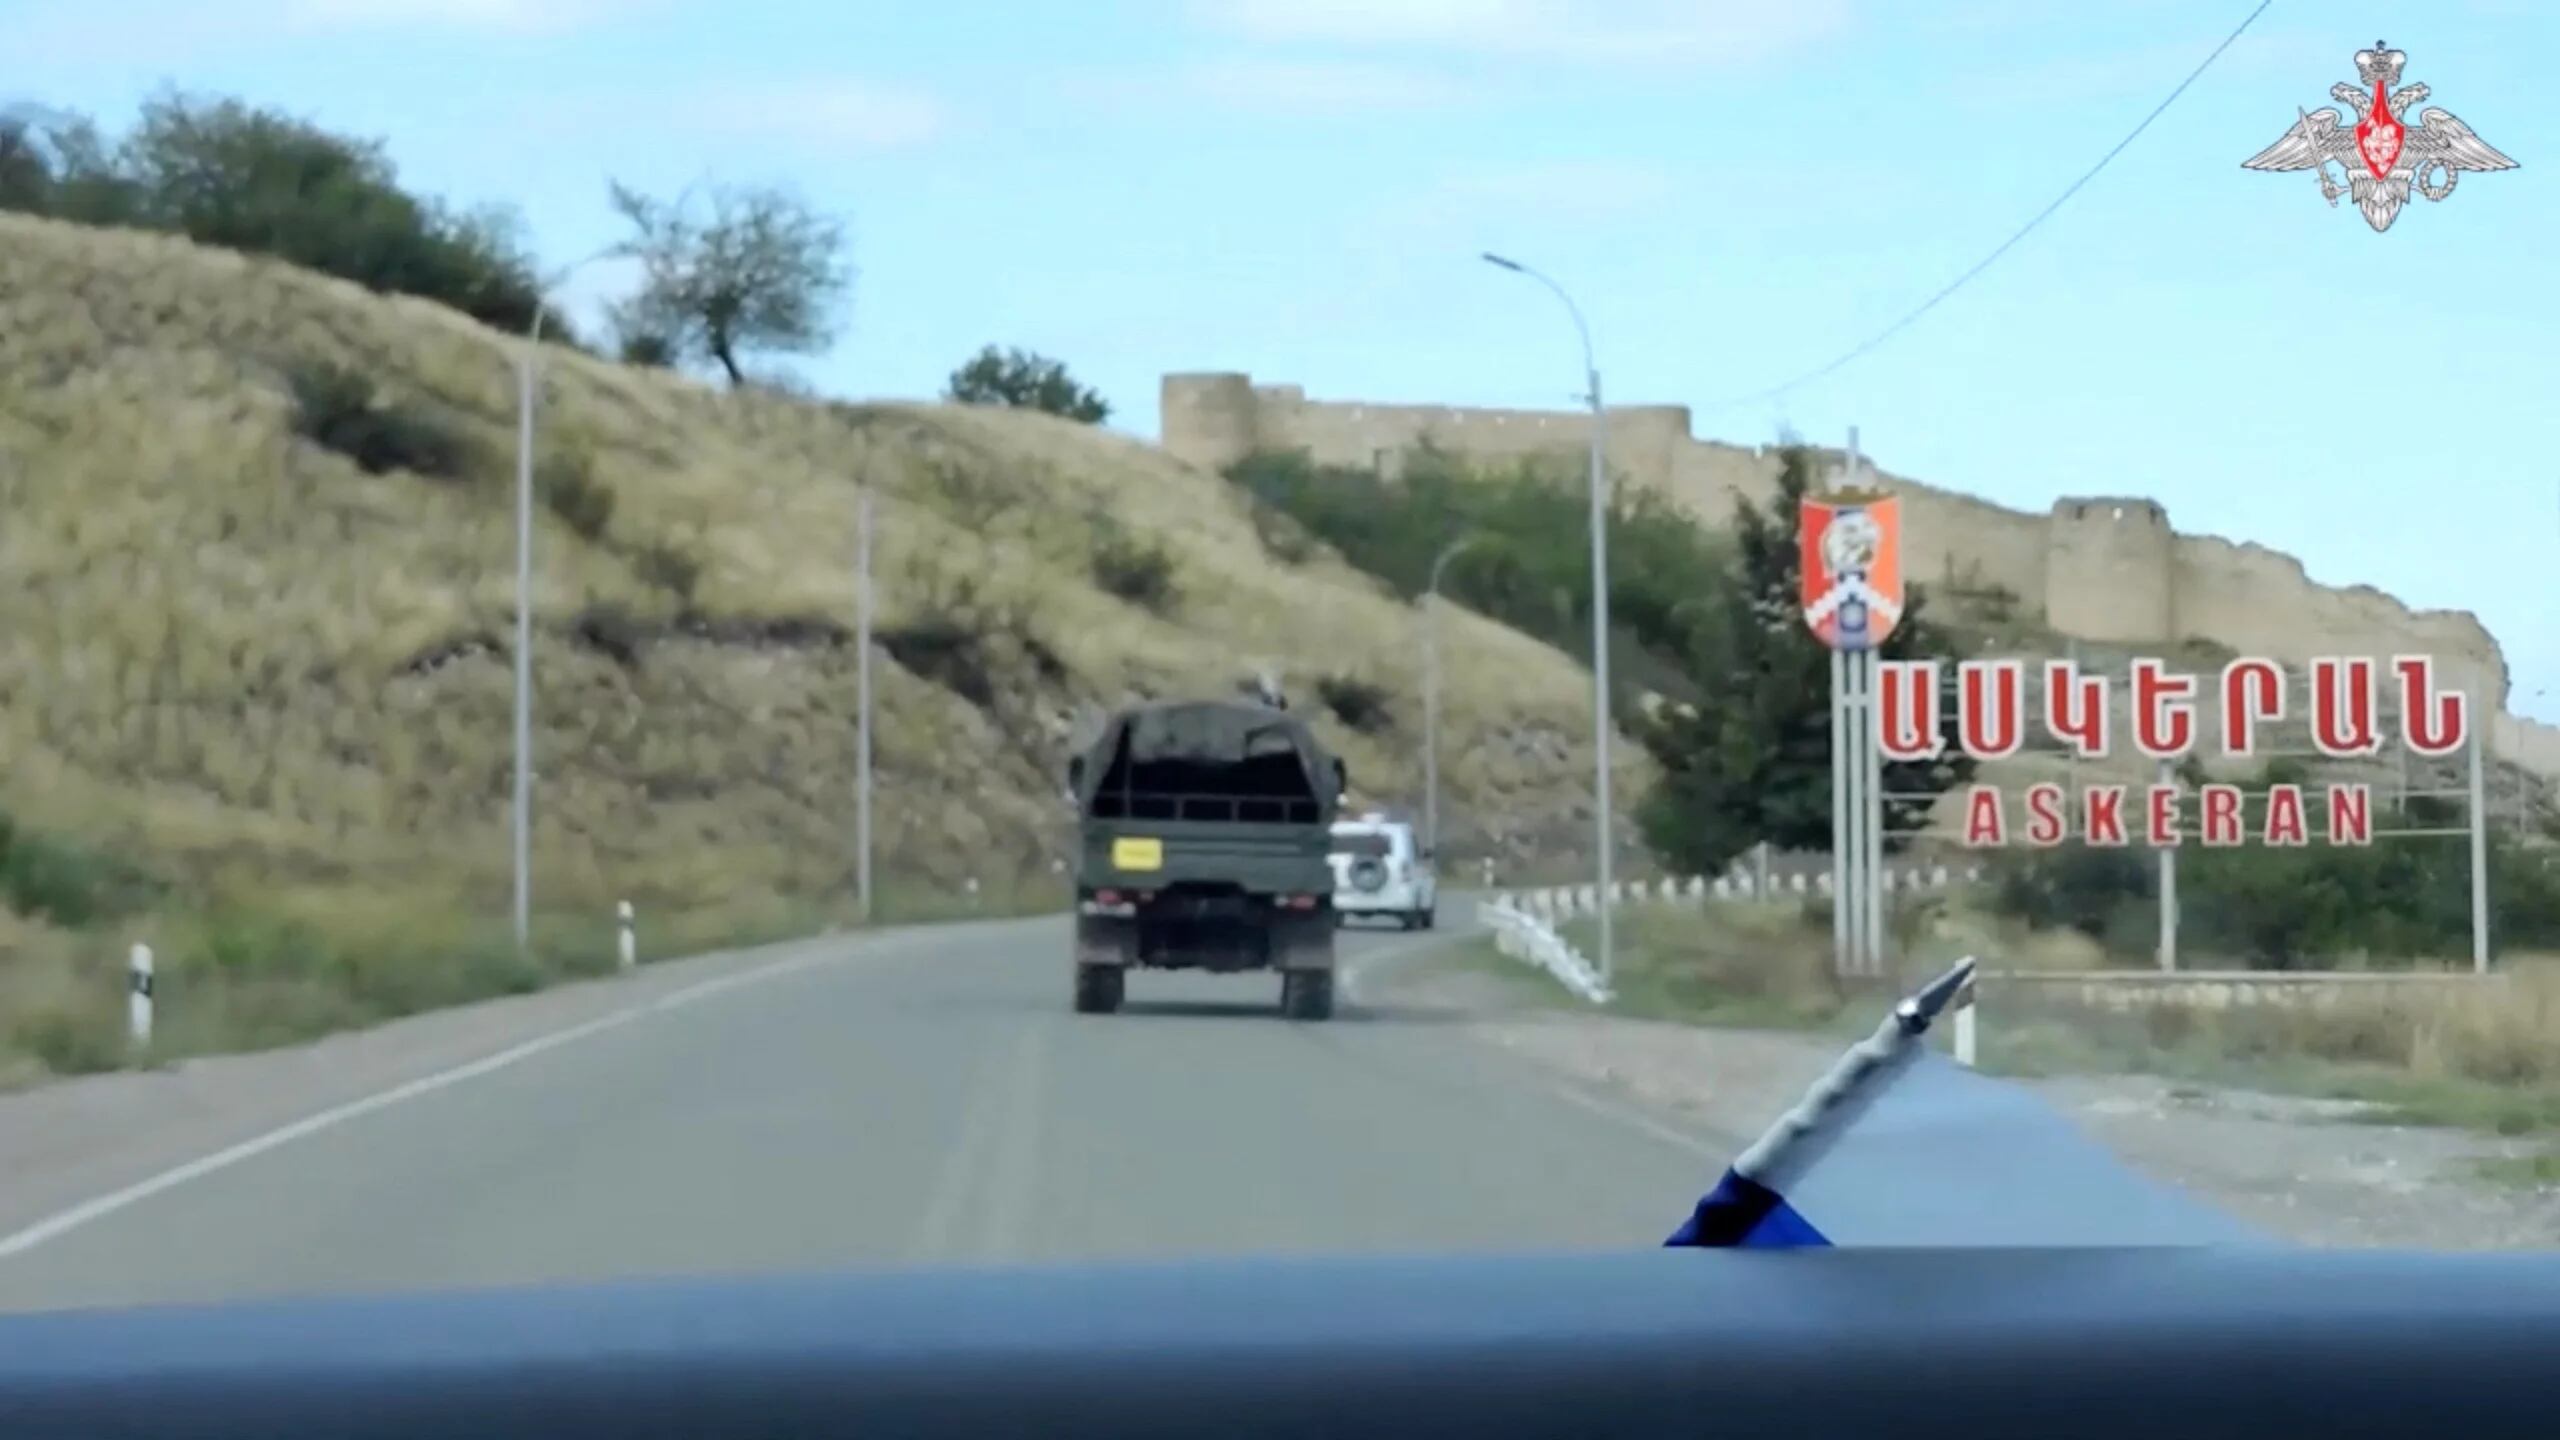 Russian peacekeepers drive vehicles to evacuate civilians in the town of Askeran following the launch of a military operation by Azerbaijani forces in the region of Nagorno-Karabakh, a region inhabited by ethnic Armenians, in this still image from video published September 20, 2023. Russian Defence Ministry/Handout via REUTERS ATTENTION EDITORS - THIS IMAGE WAS PROVIDED BY A THIRD PARTY. NO RESALES. NO ARCHIVES. MANDATORY CREDIT. WATERMARK FROM SOURCE.